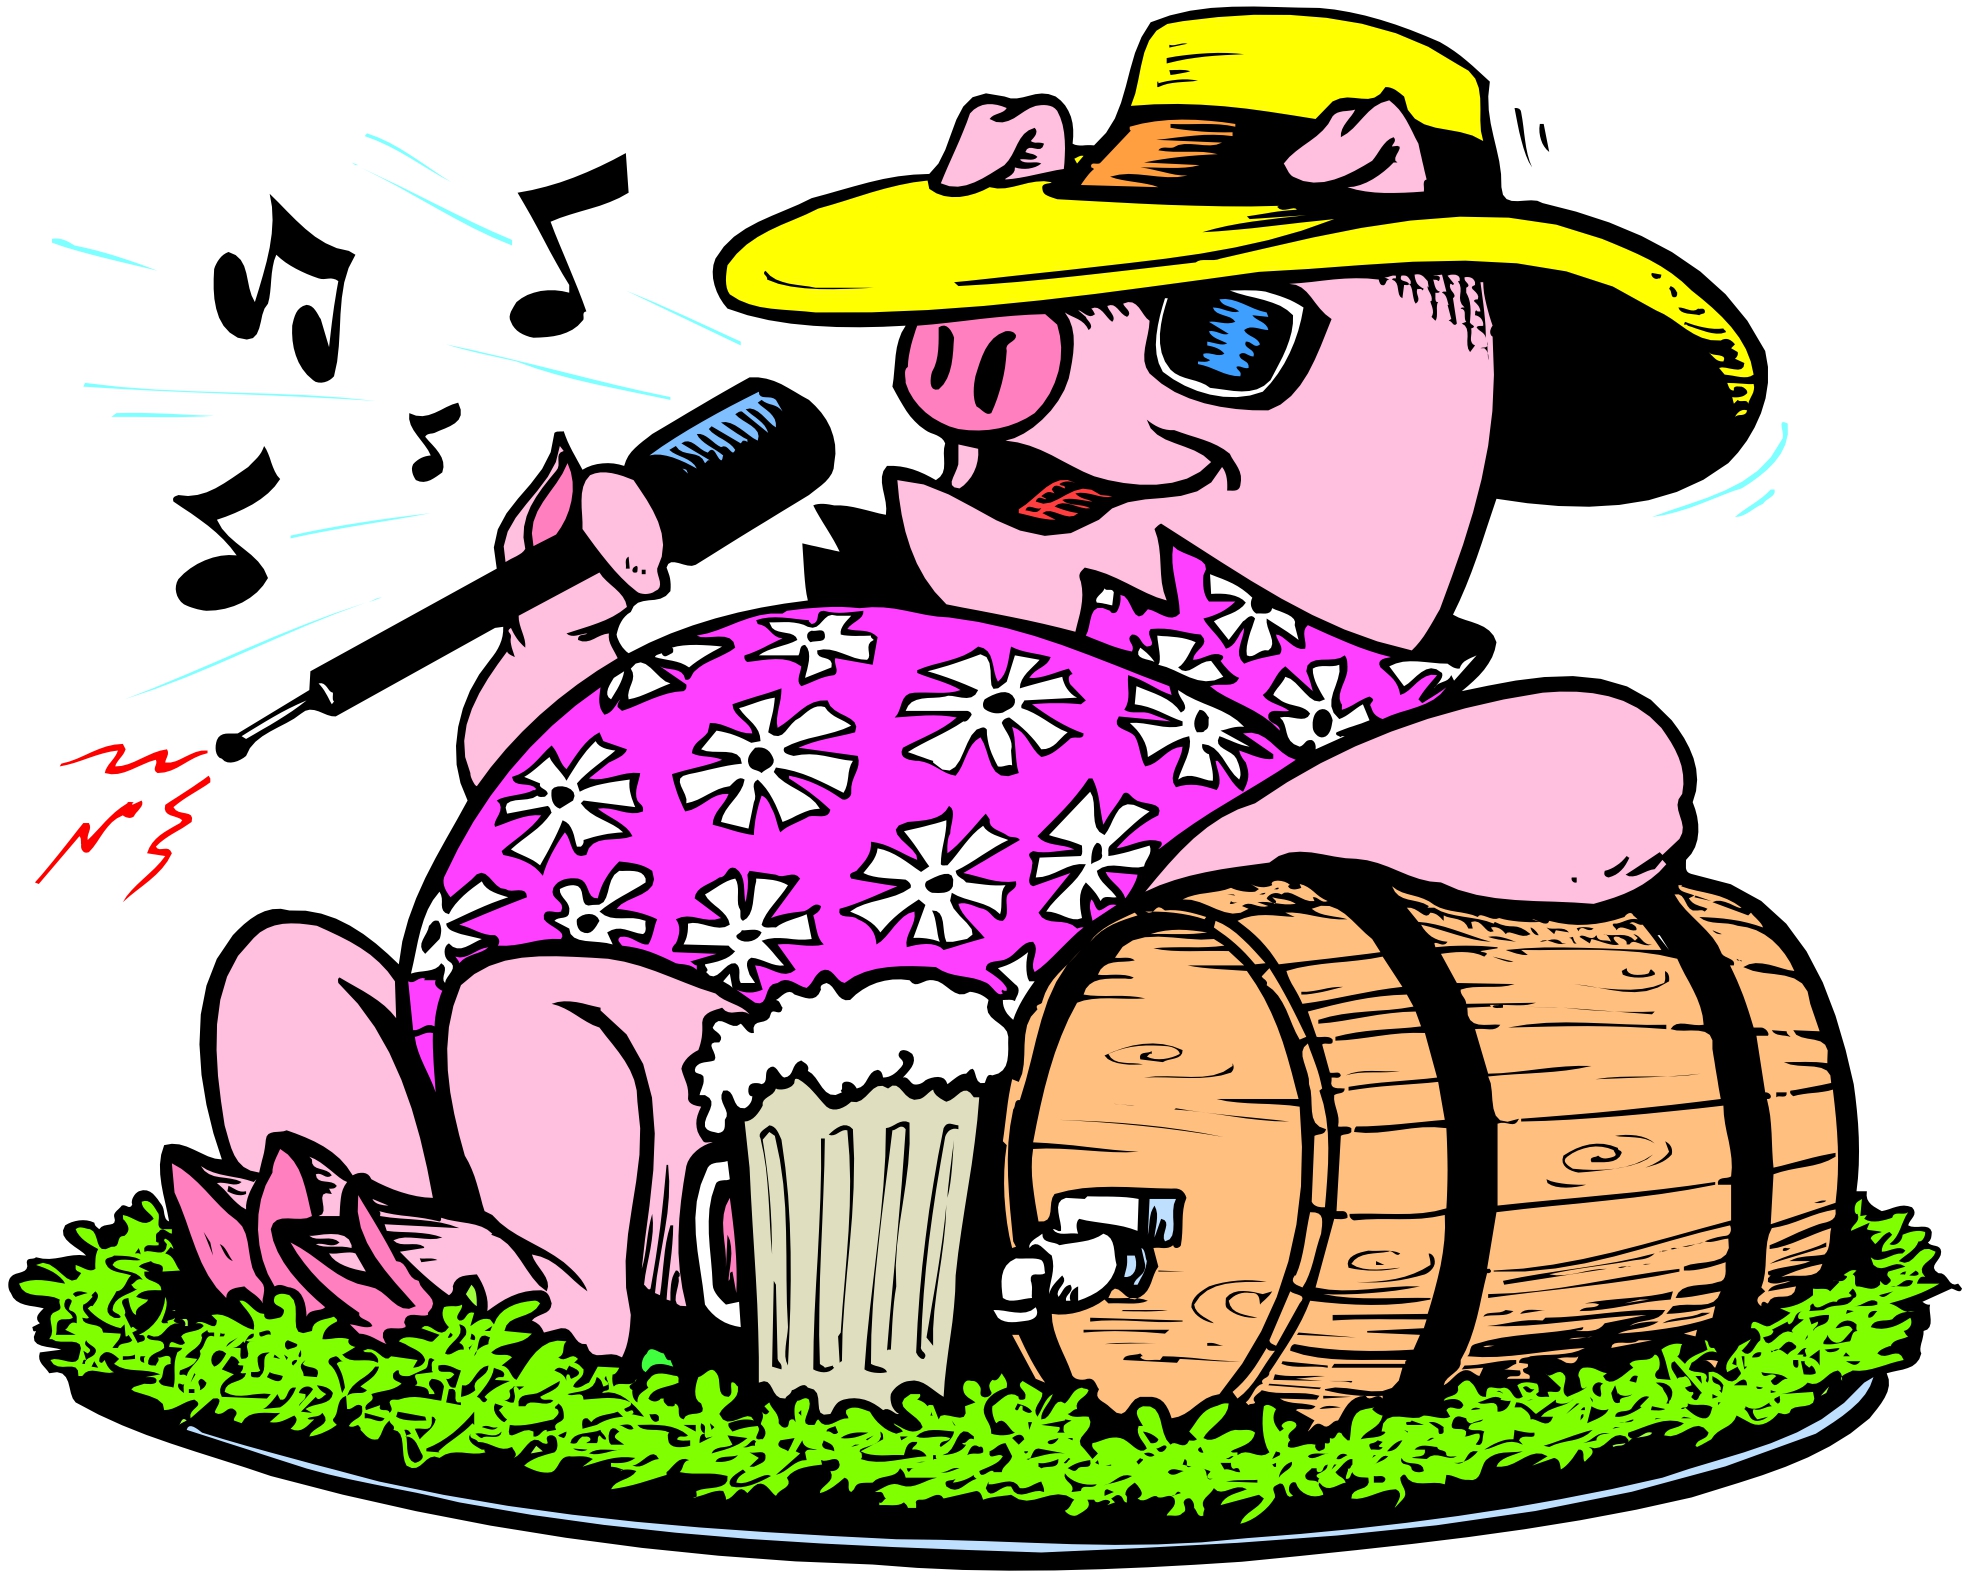 pigs clipart party